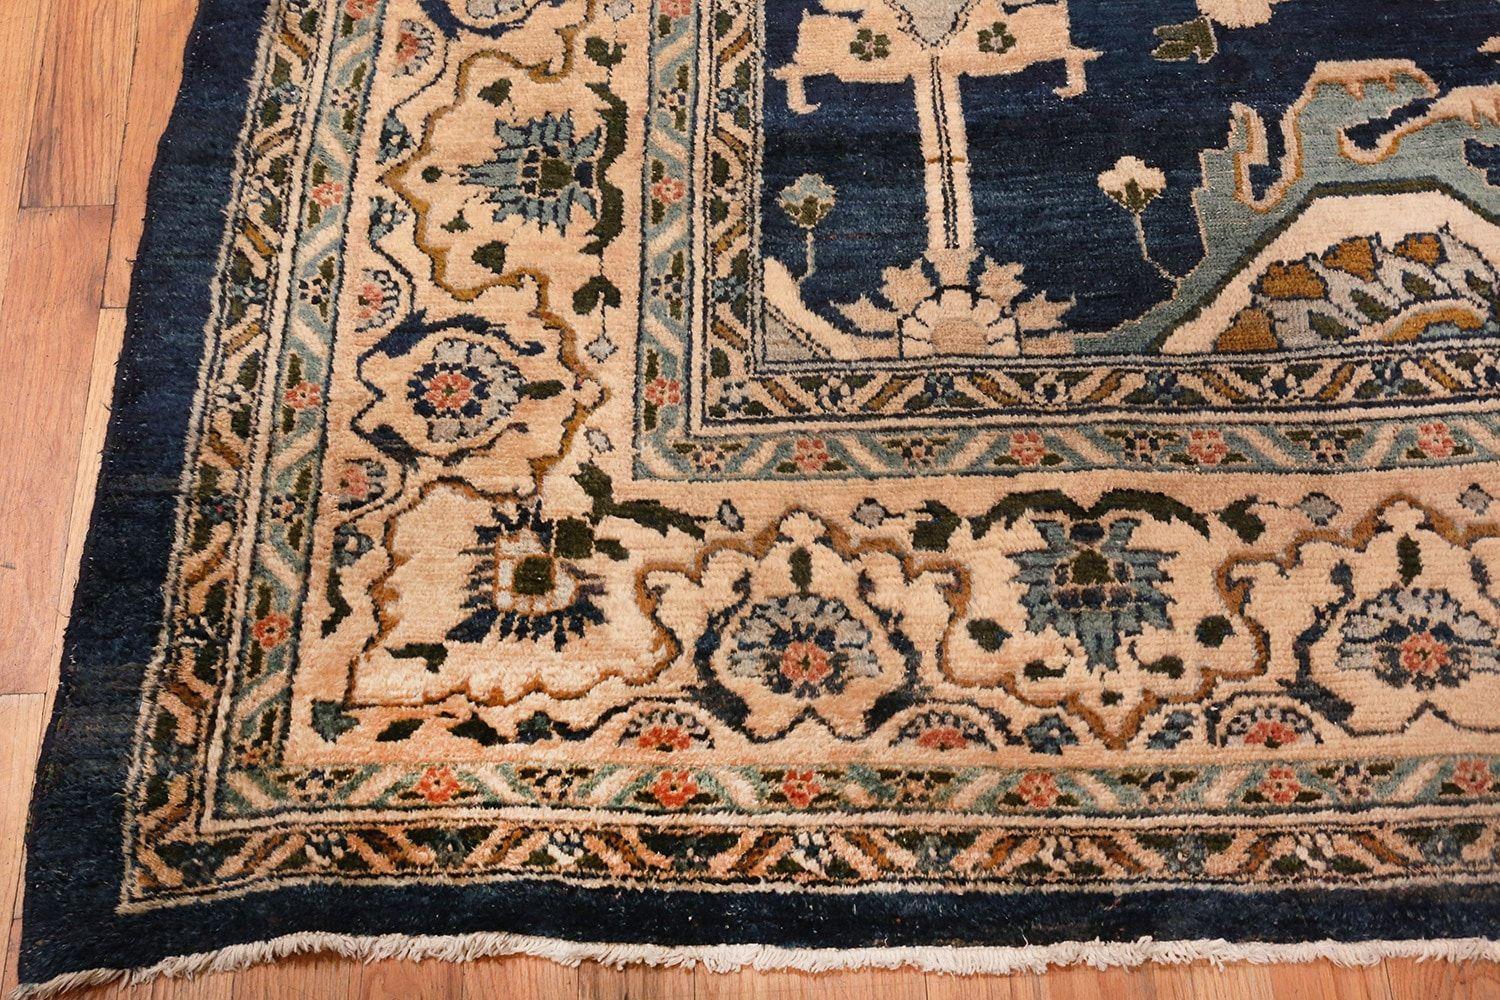 Beautifully Impressive Large Scale and Large Size Blue Color Background Antique Persian Malayer Rug, Country Of Origin / Rug Type: Antique Persian Rugs, Circa Date: Early 20th Century. Size: 9 ft 10 in x 16 ft 8 in (3 m x 5.08 m)

Regal and stately,